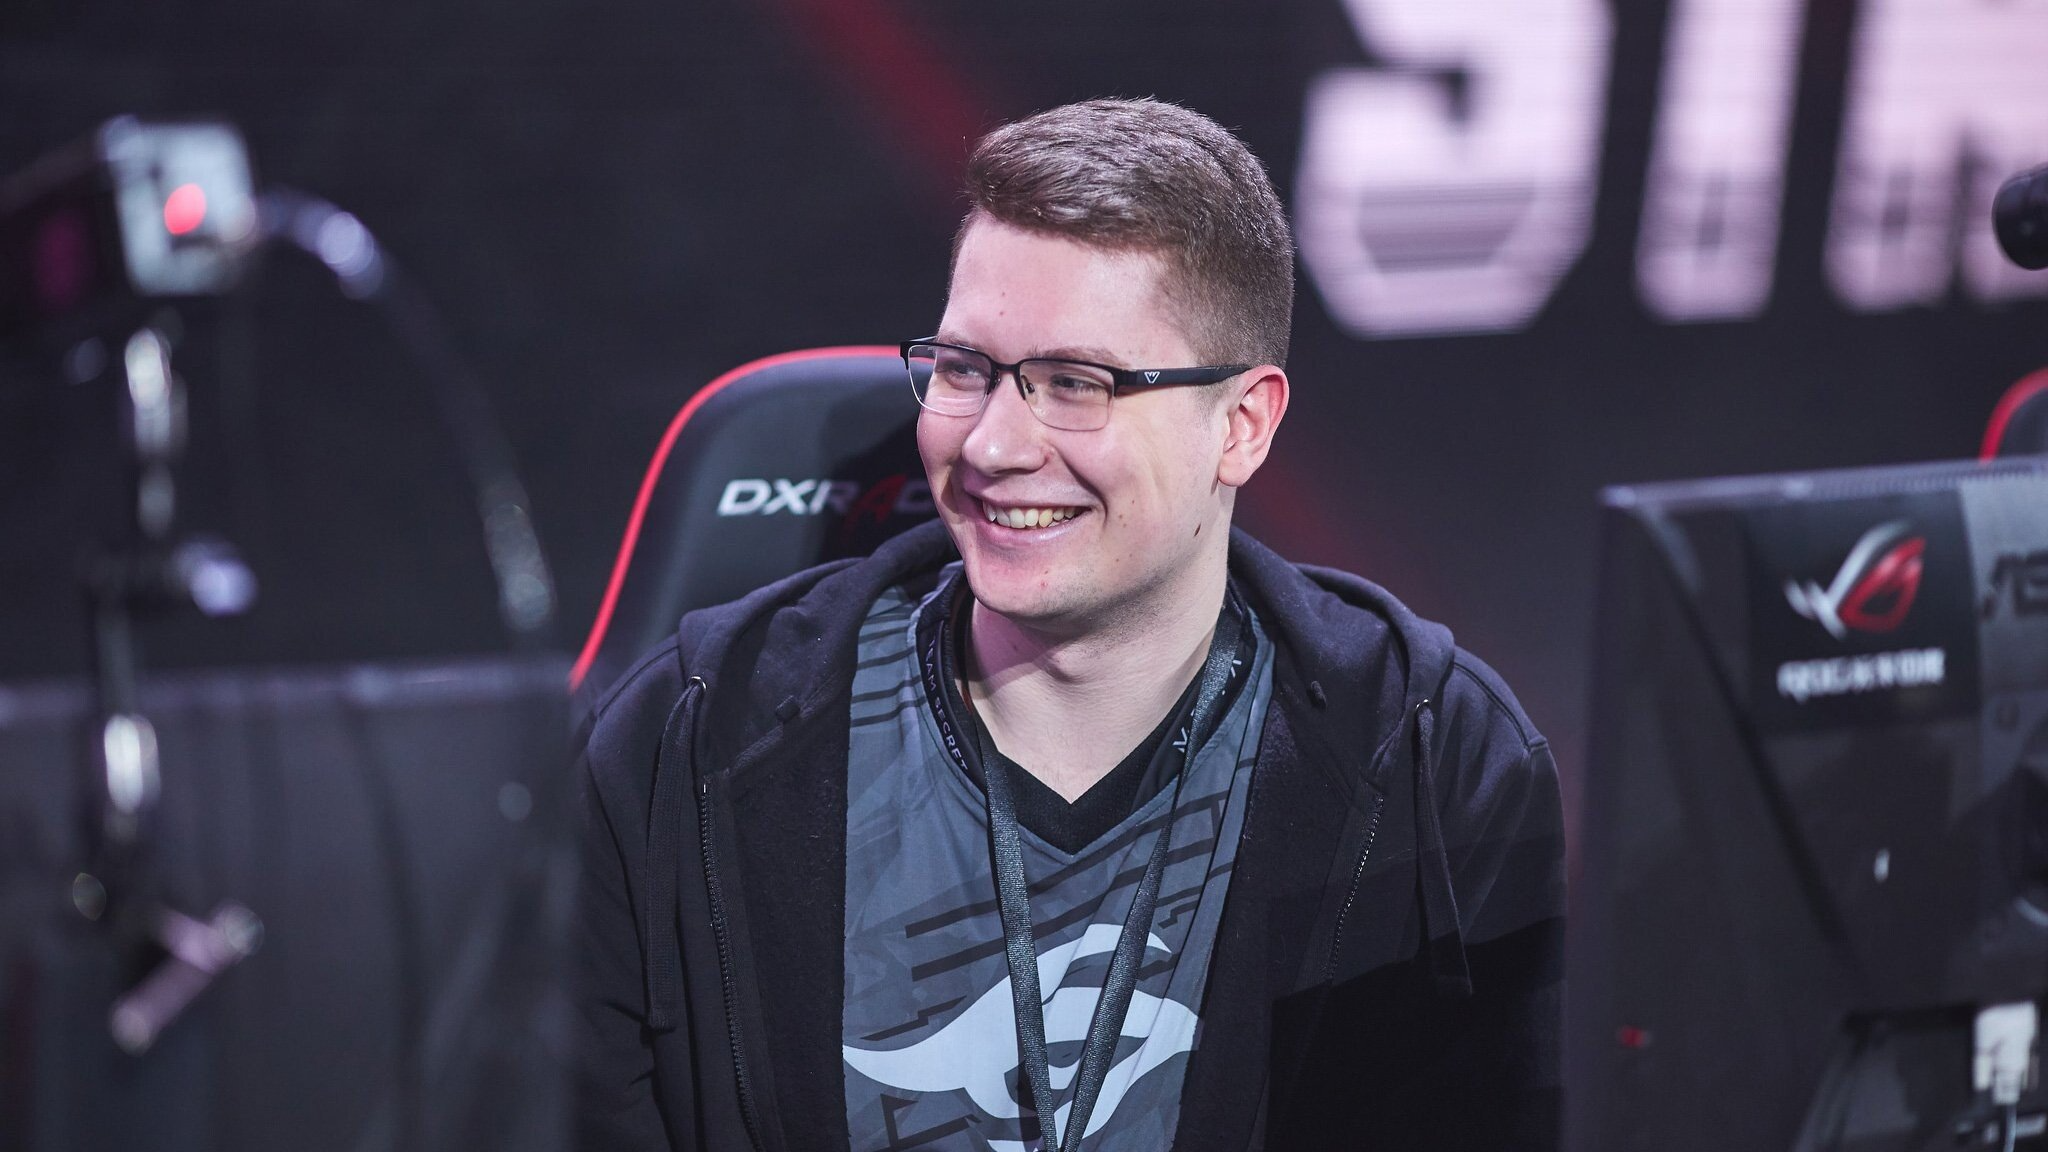 Puppey May Go To TI 12 As Coach